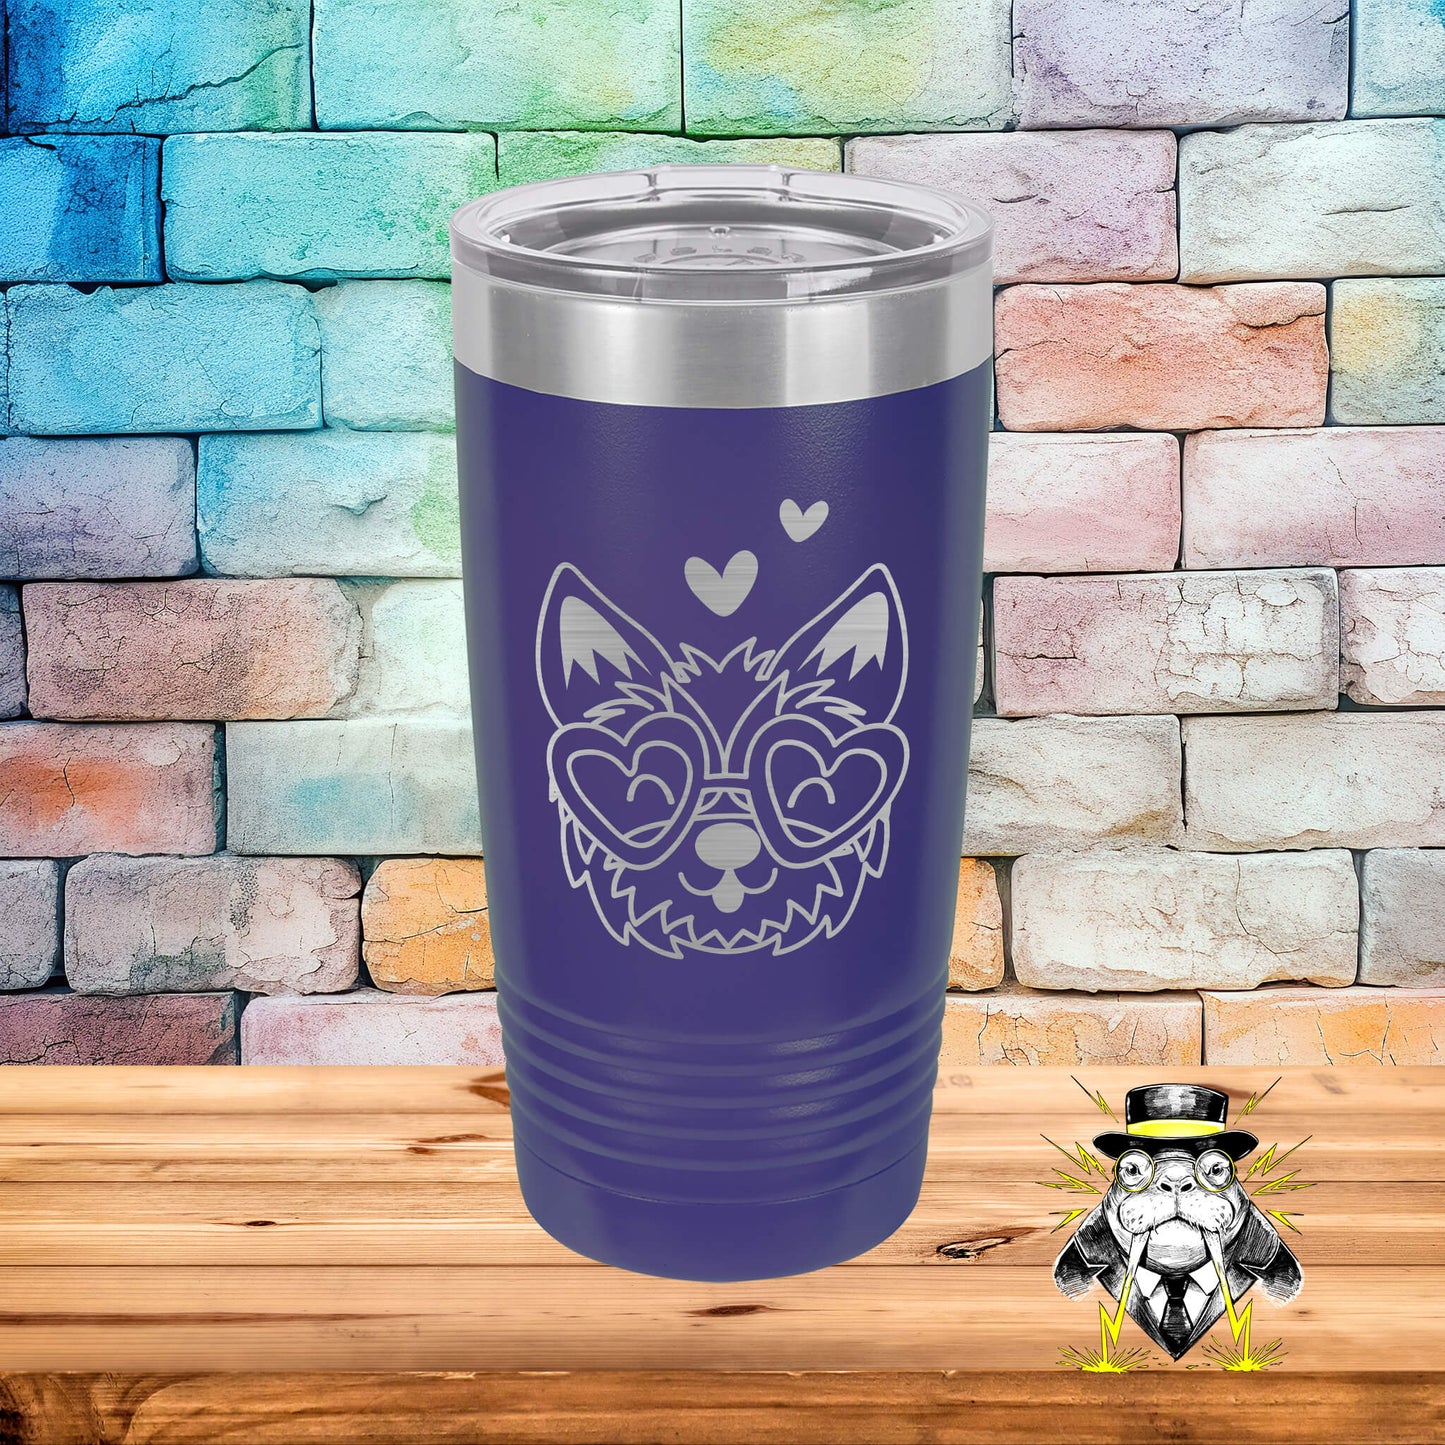 Dog with Hearts 7 Engraved Tumbler